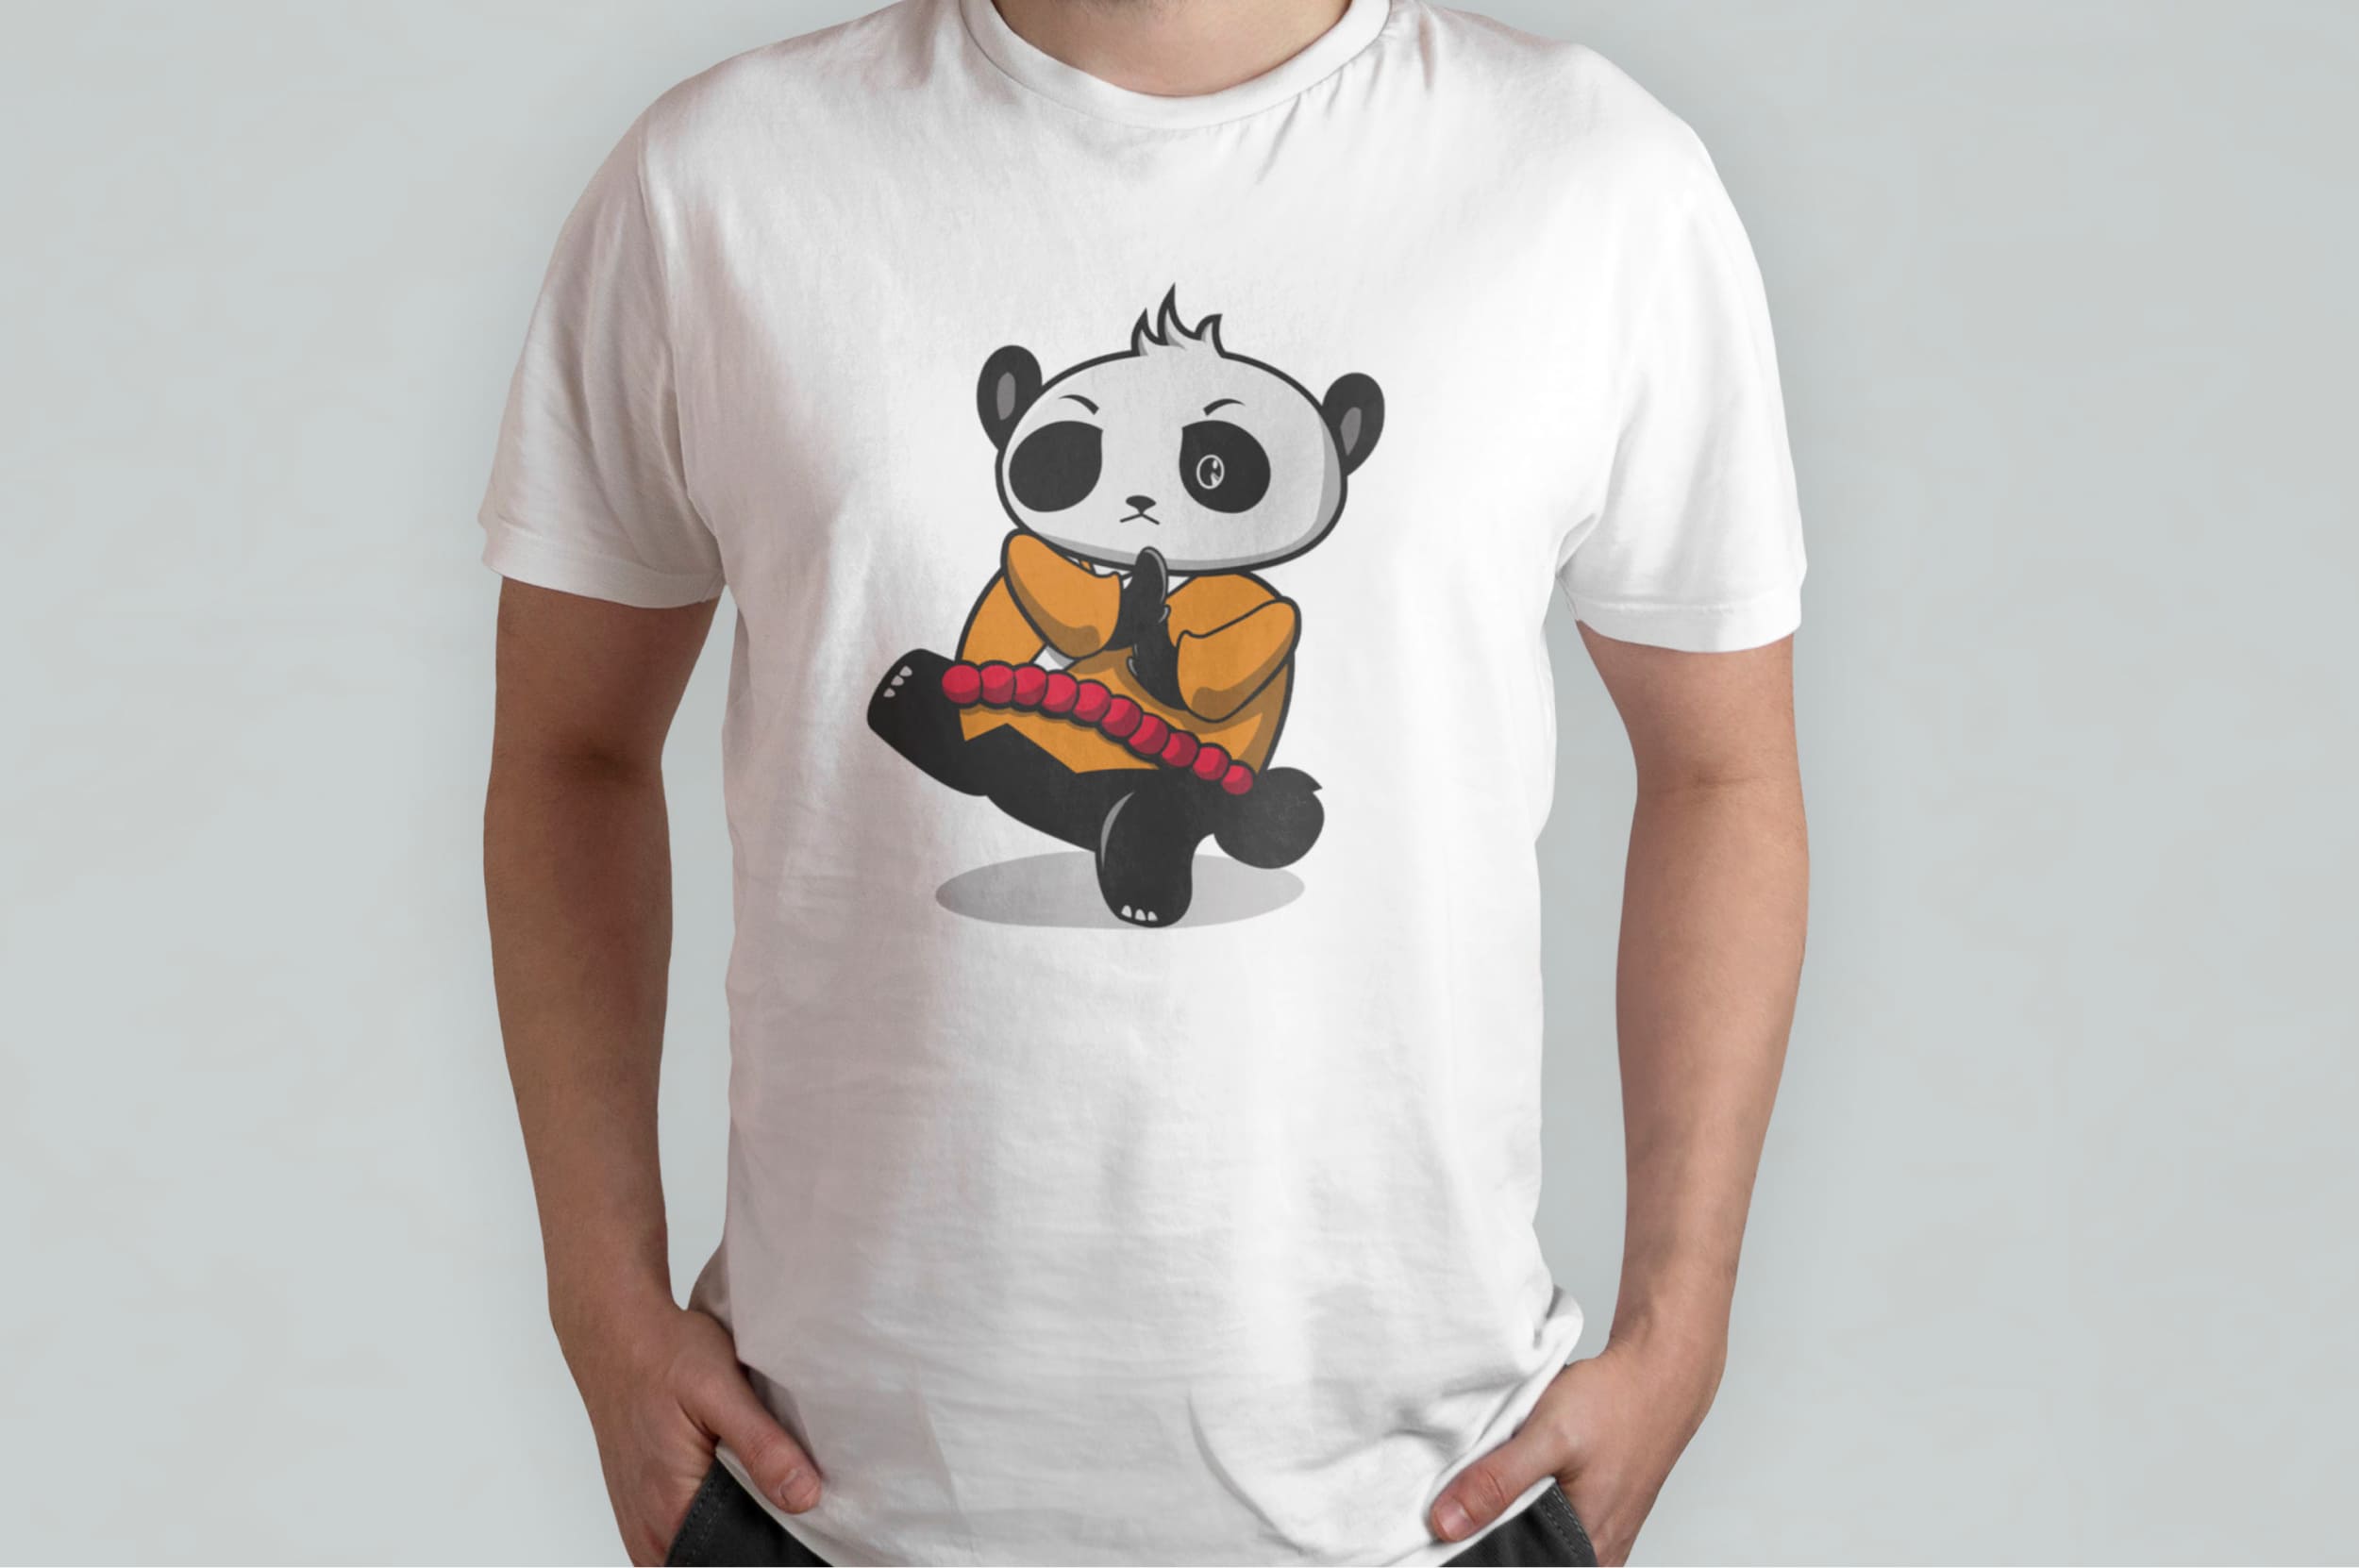 White t-shirt with kung fu panda on a man on a gray background.